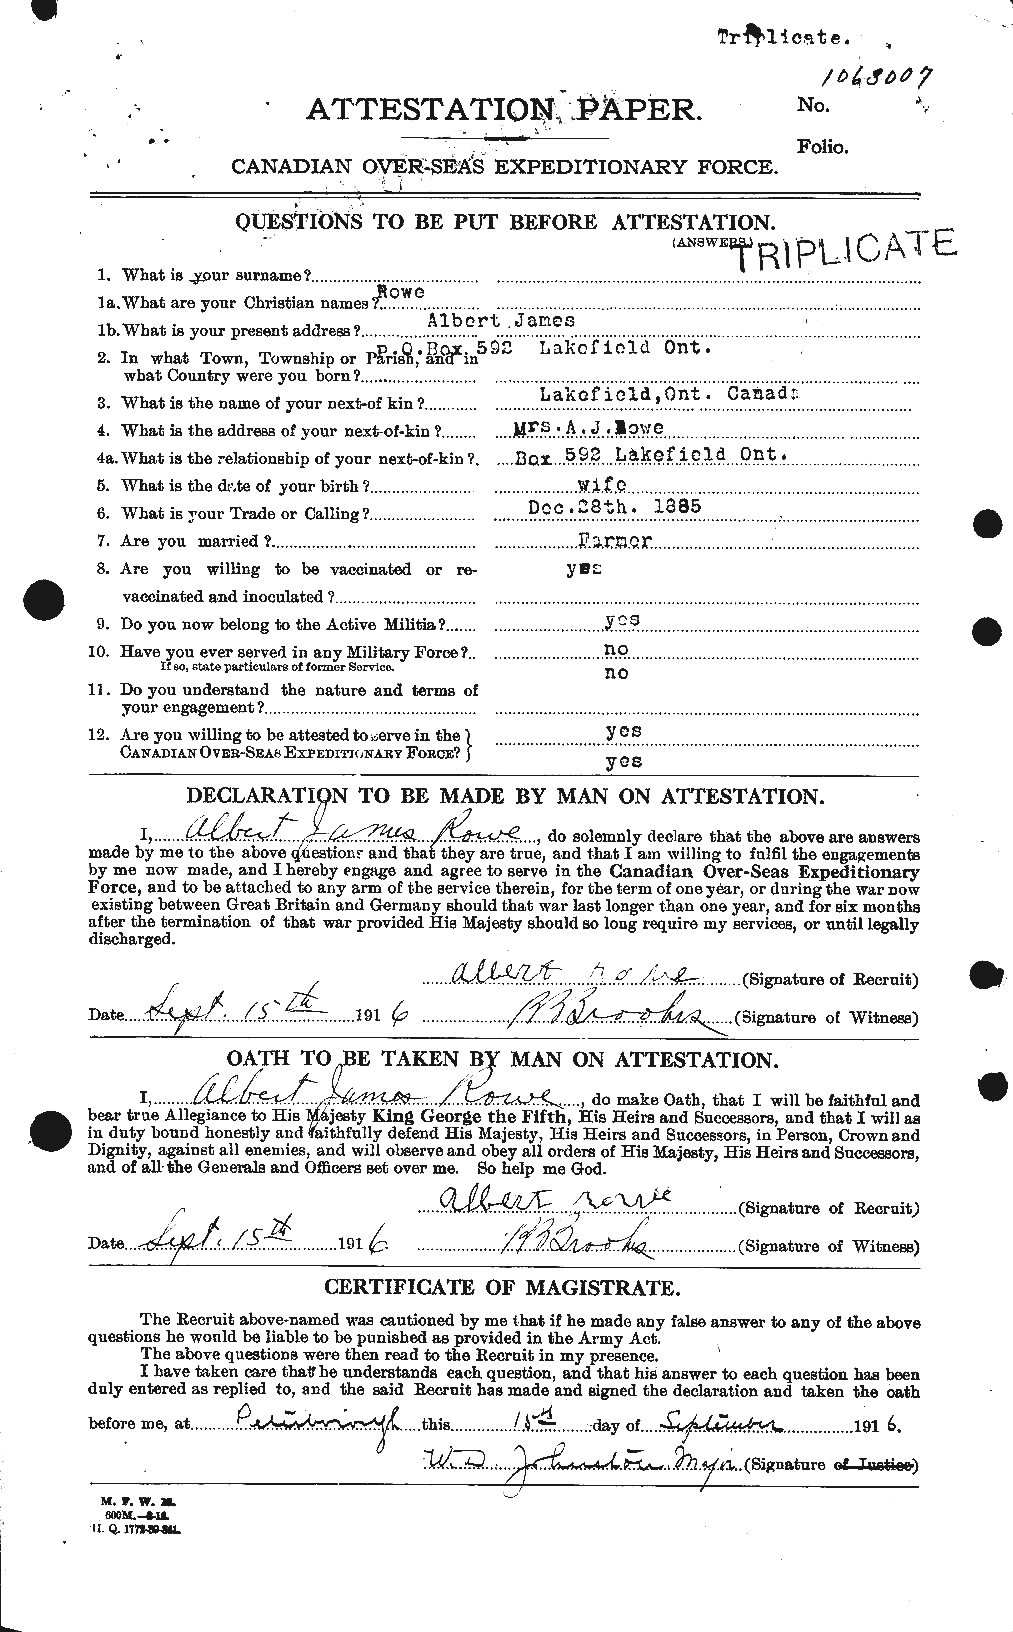 Personnel Records of the First World War - CEF 615785a